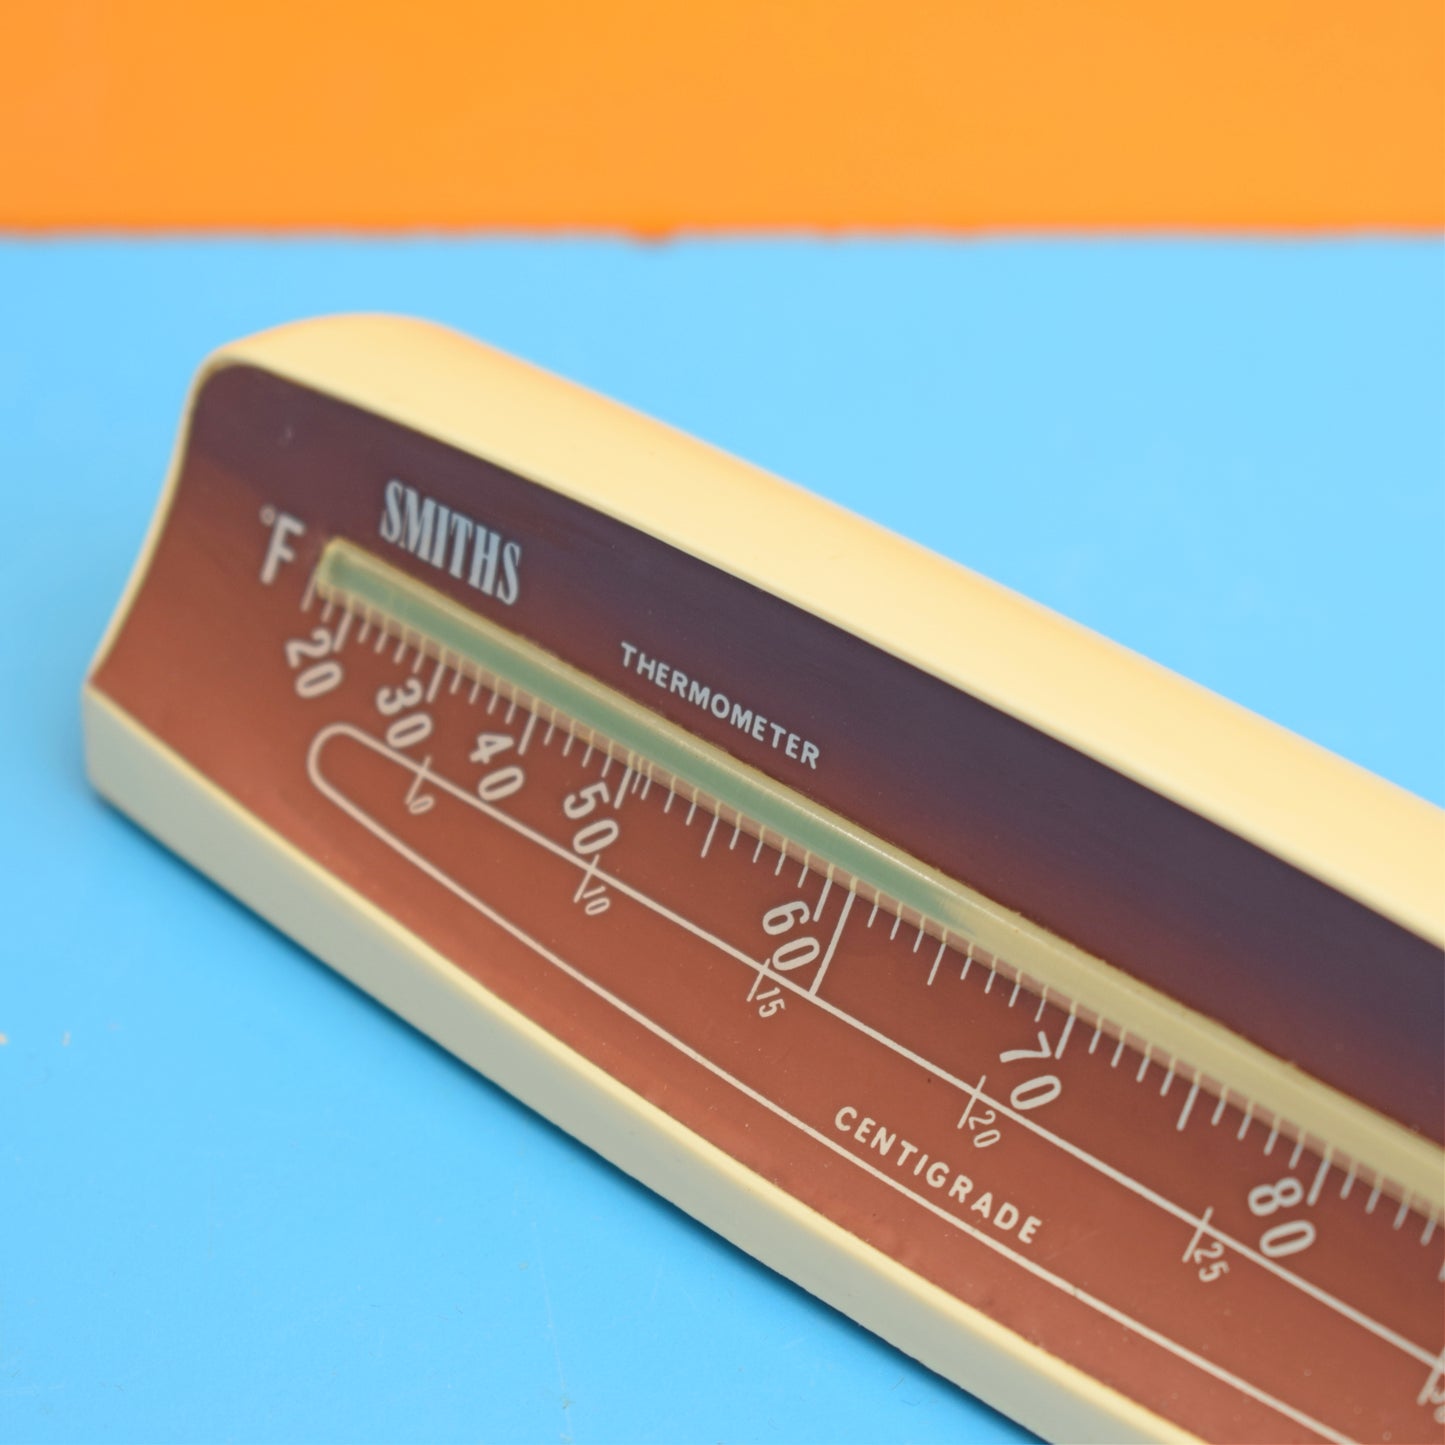 Vintage 1960s Table Thermometer - Smiths